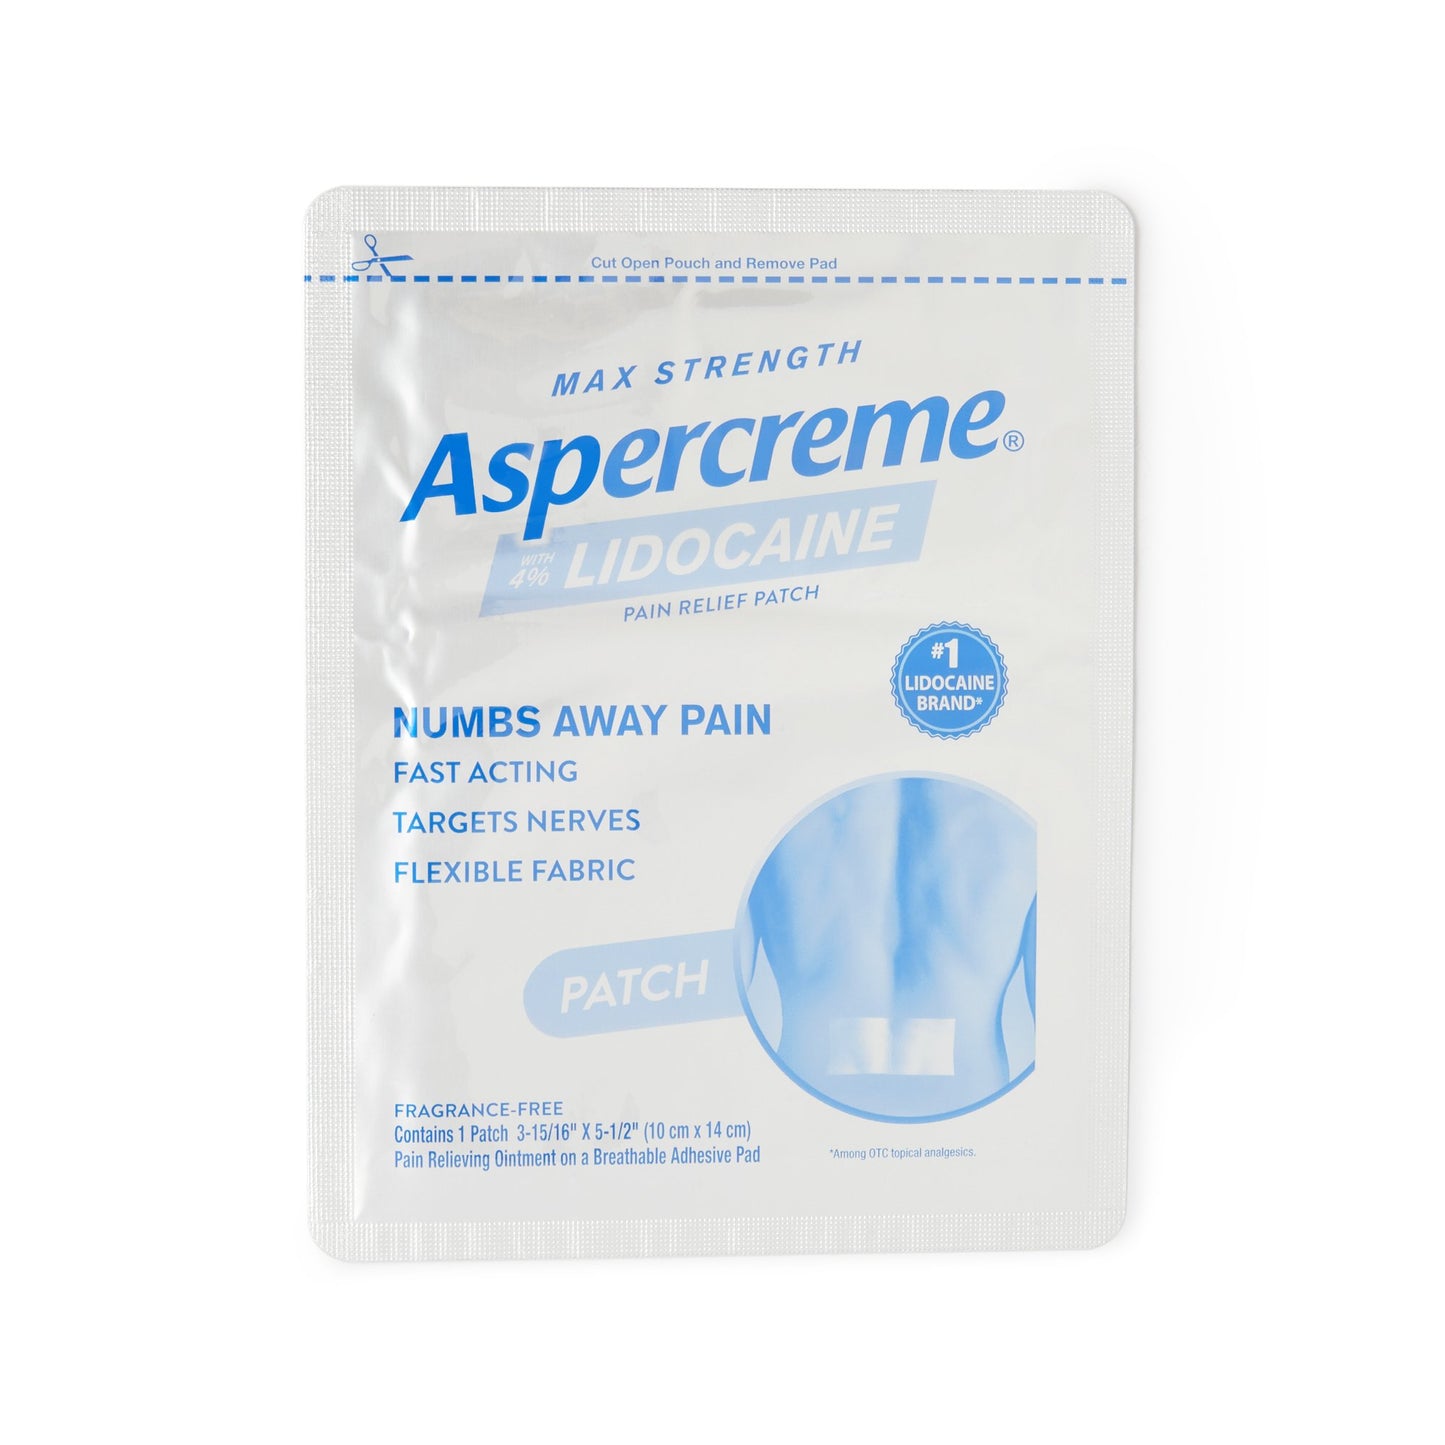 Aspercreme® Lidocaine Topical Pain Relief Patch, 5 ct.